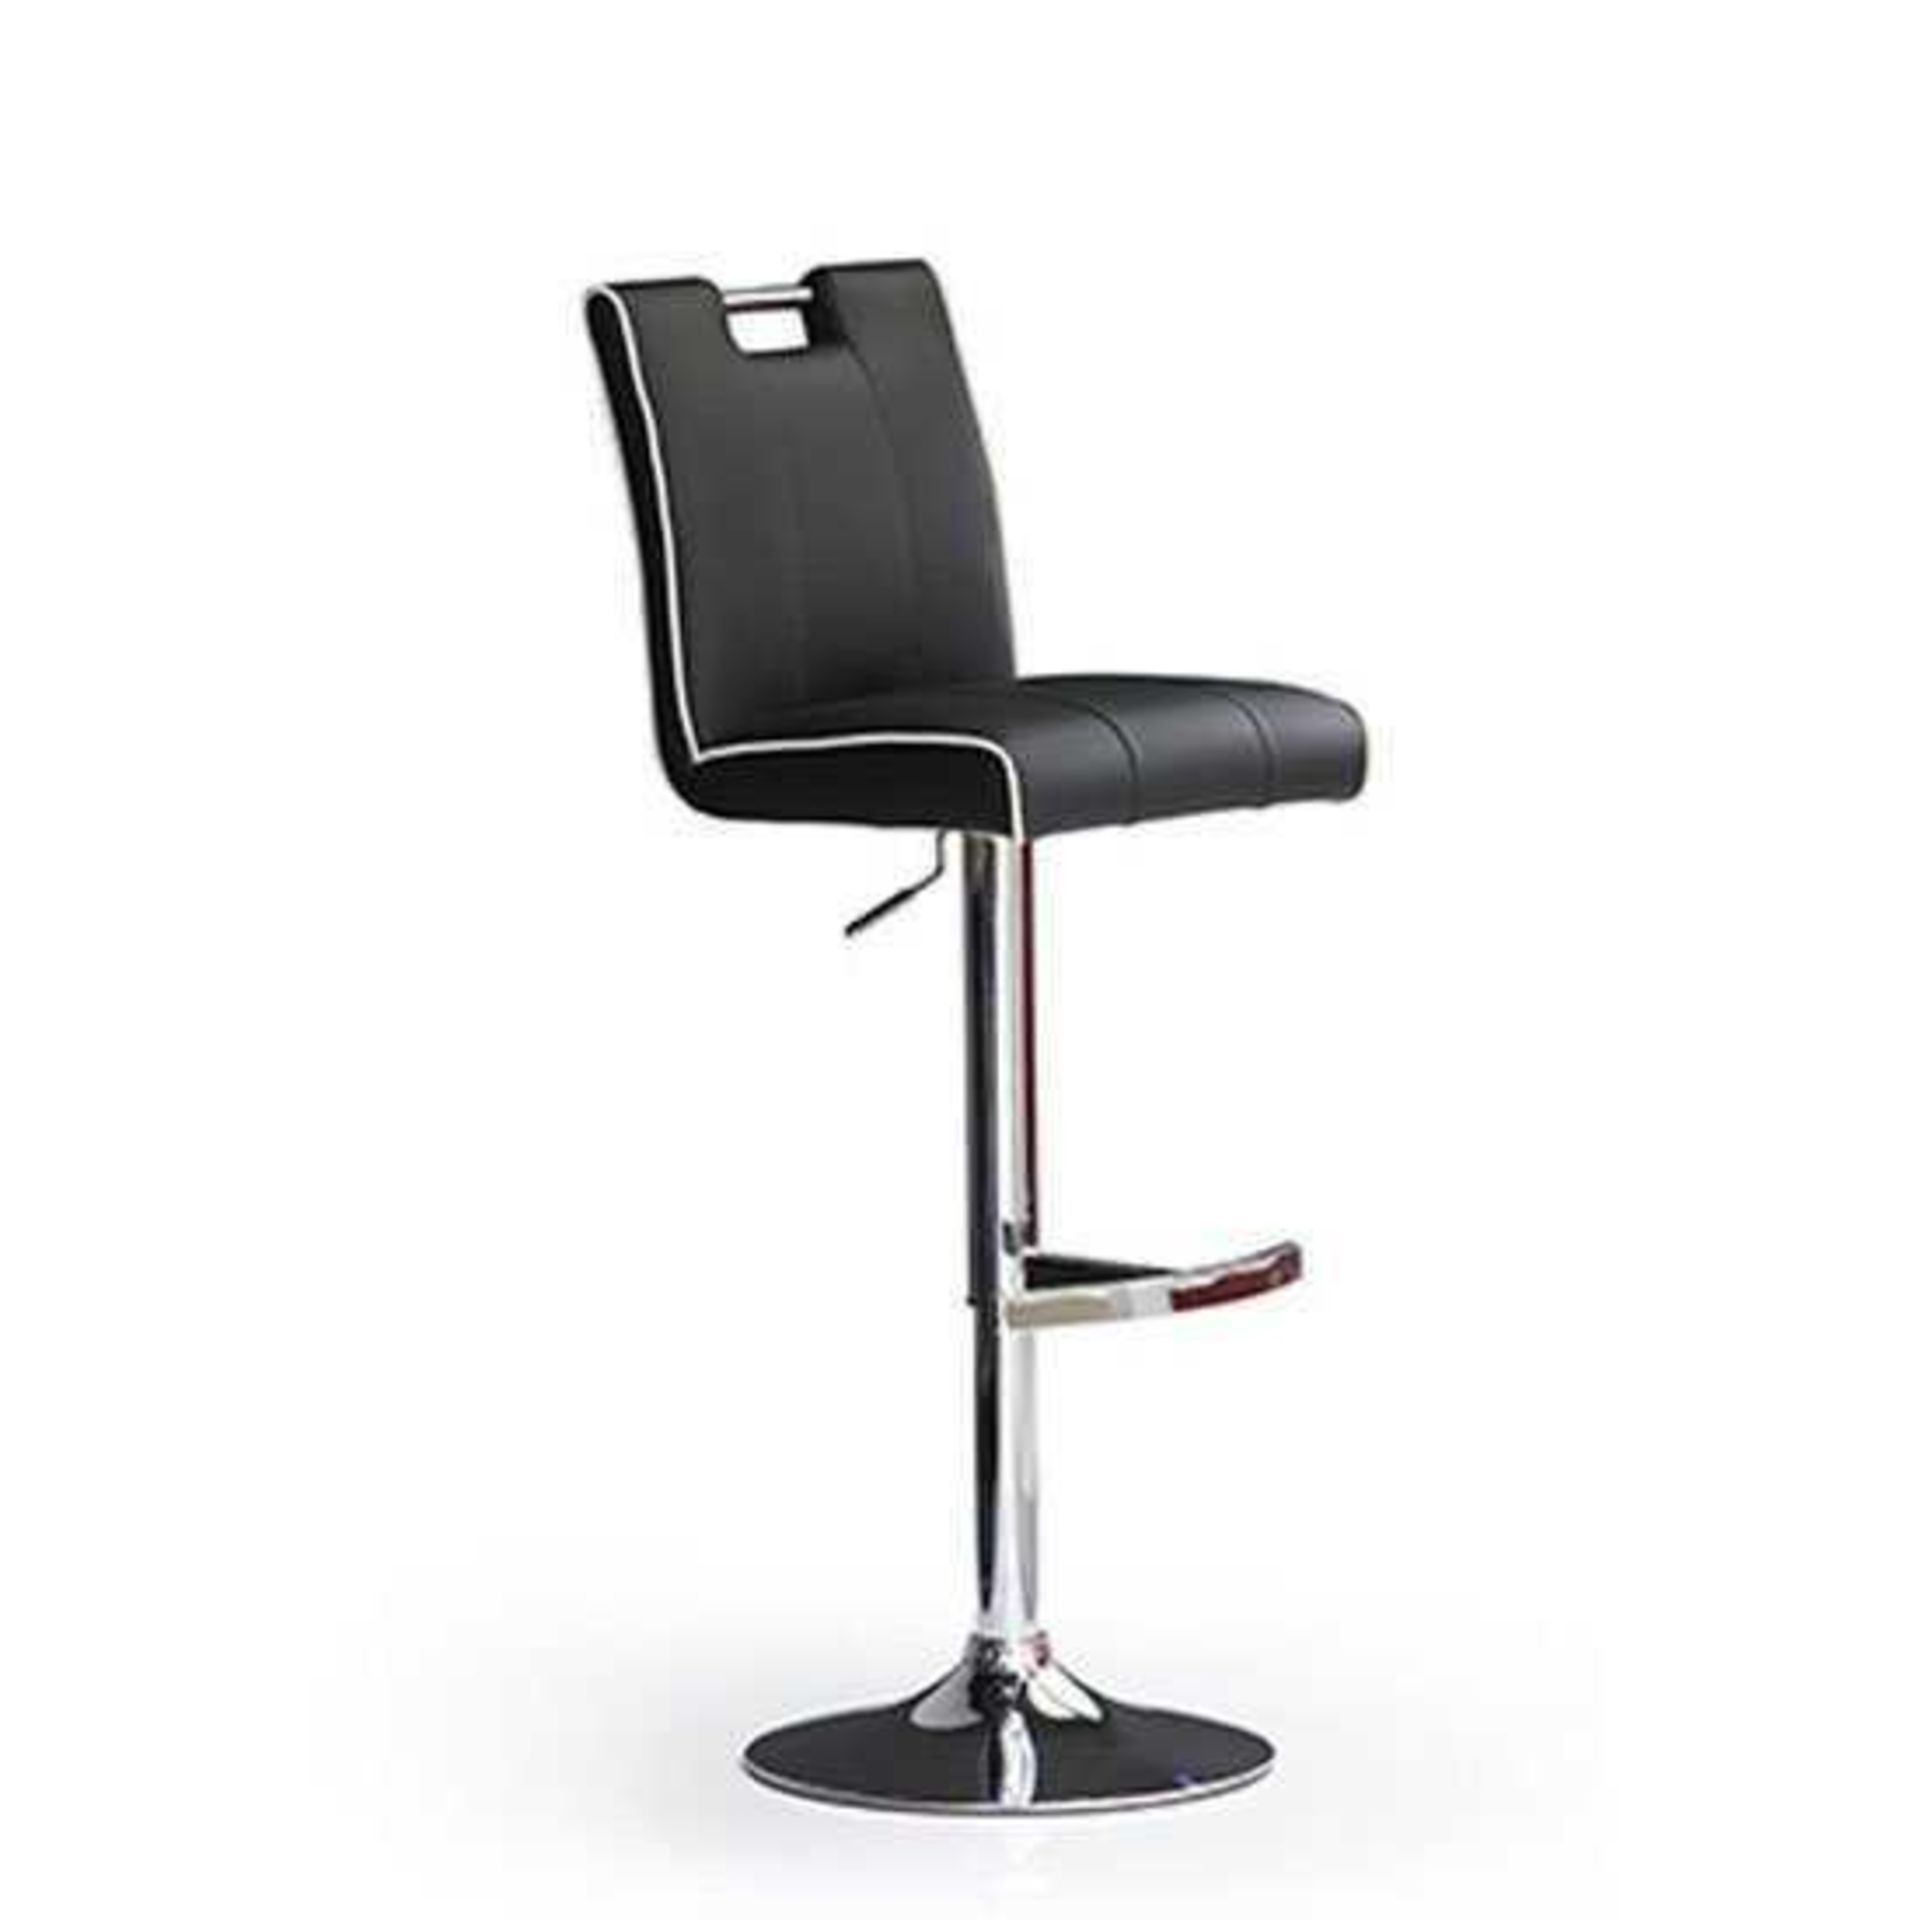 RRP £100 - Boxed 'Casta' Barstool In Black Faux Leather With Chrome Base (Appraisals Available On